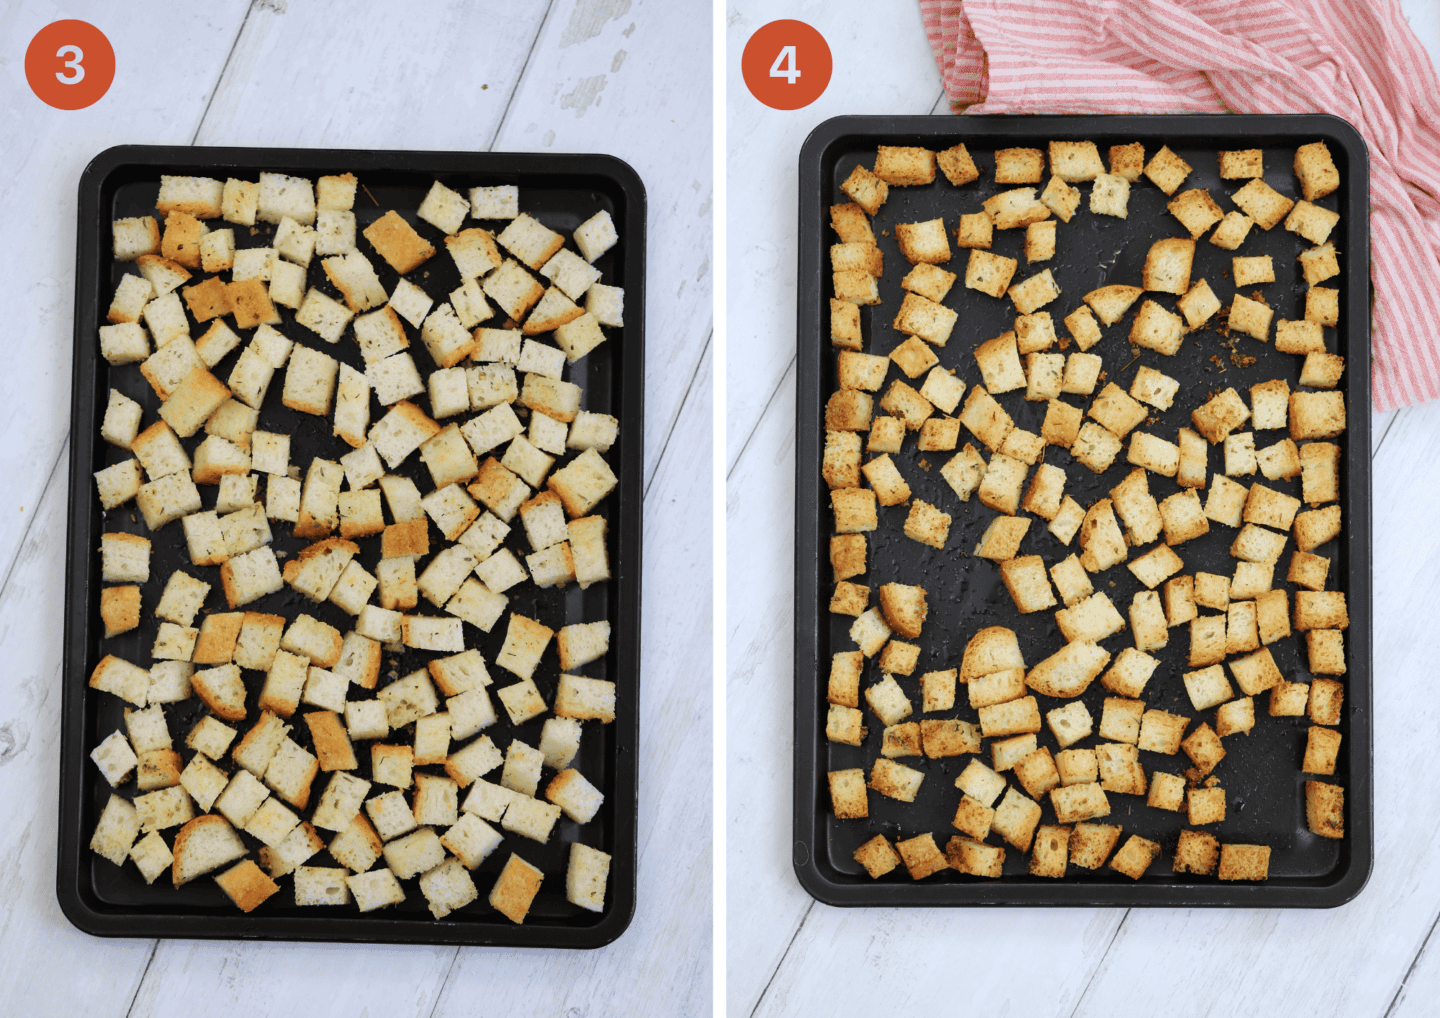 The gluten free croutons before (left) and after (right) cooking.